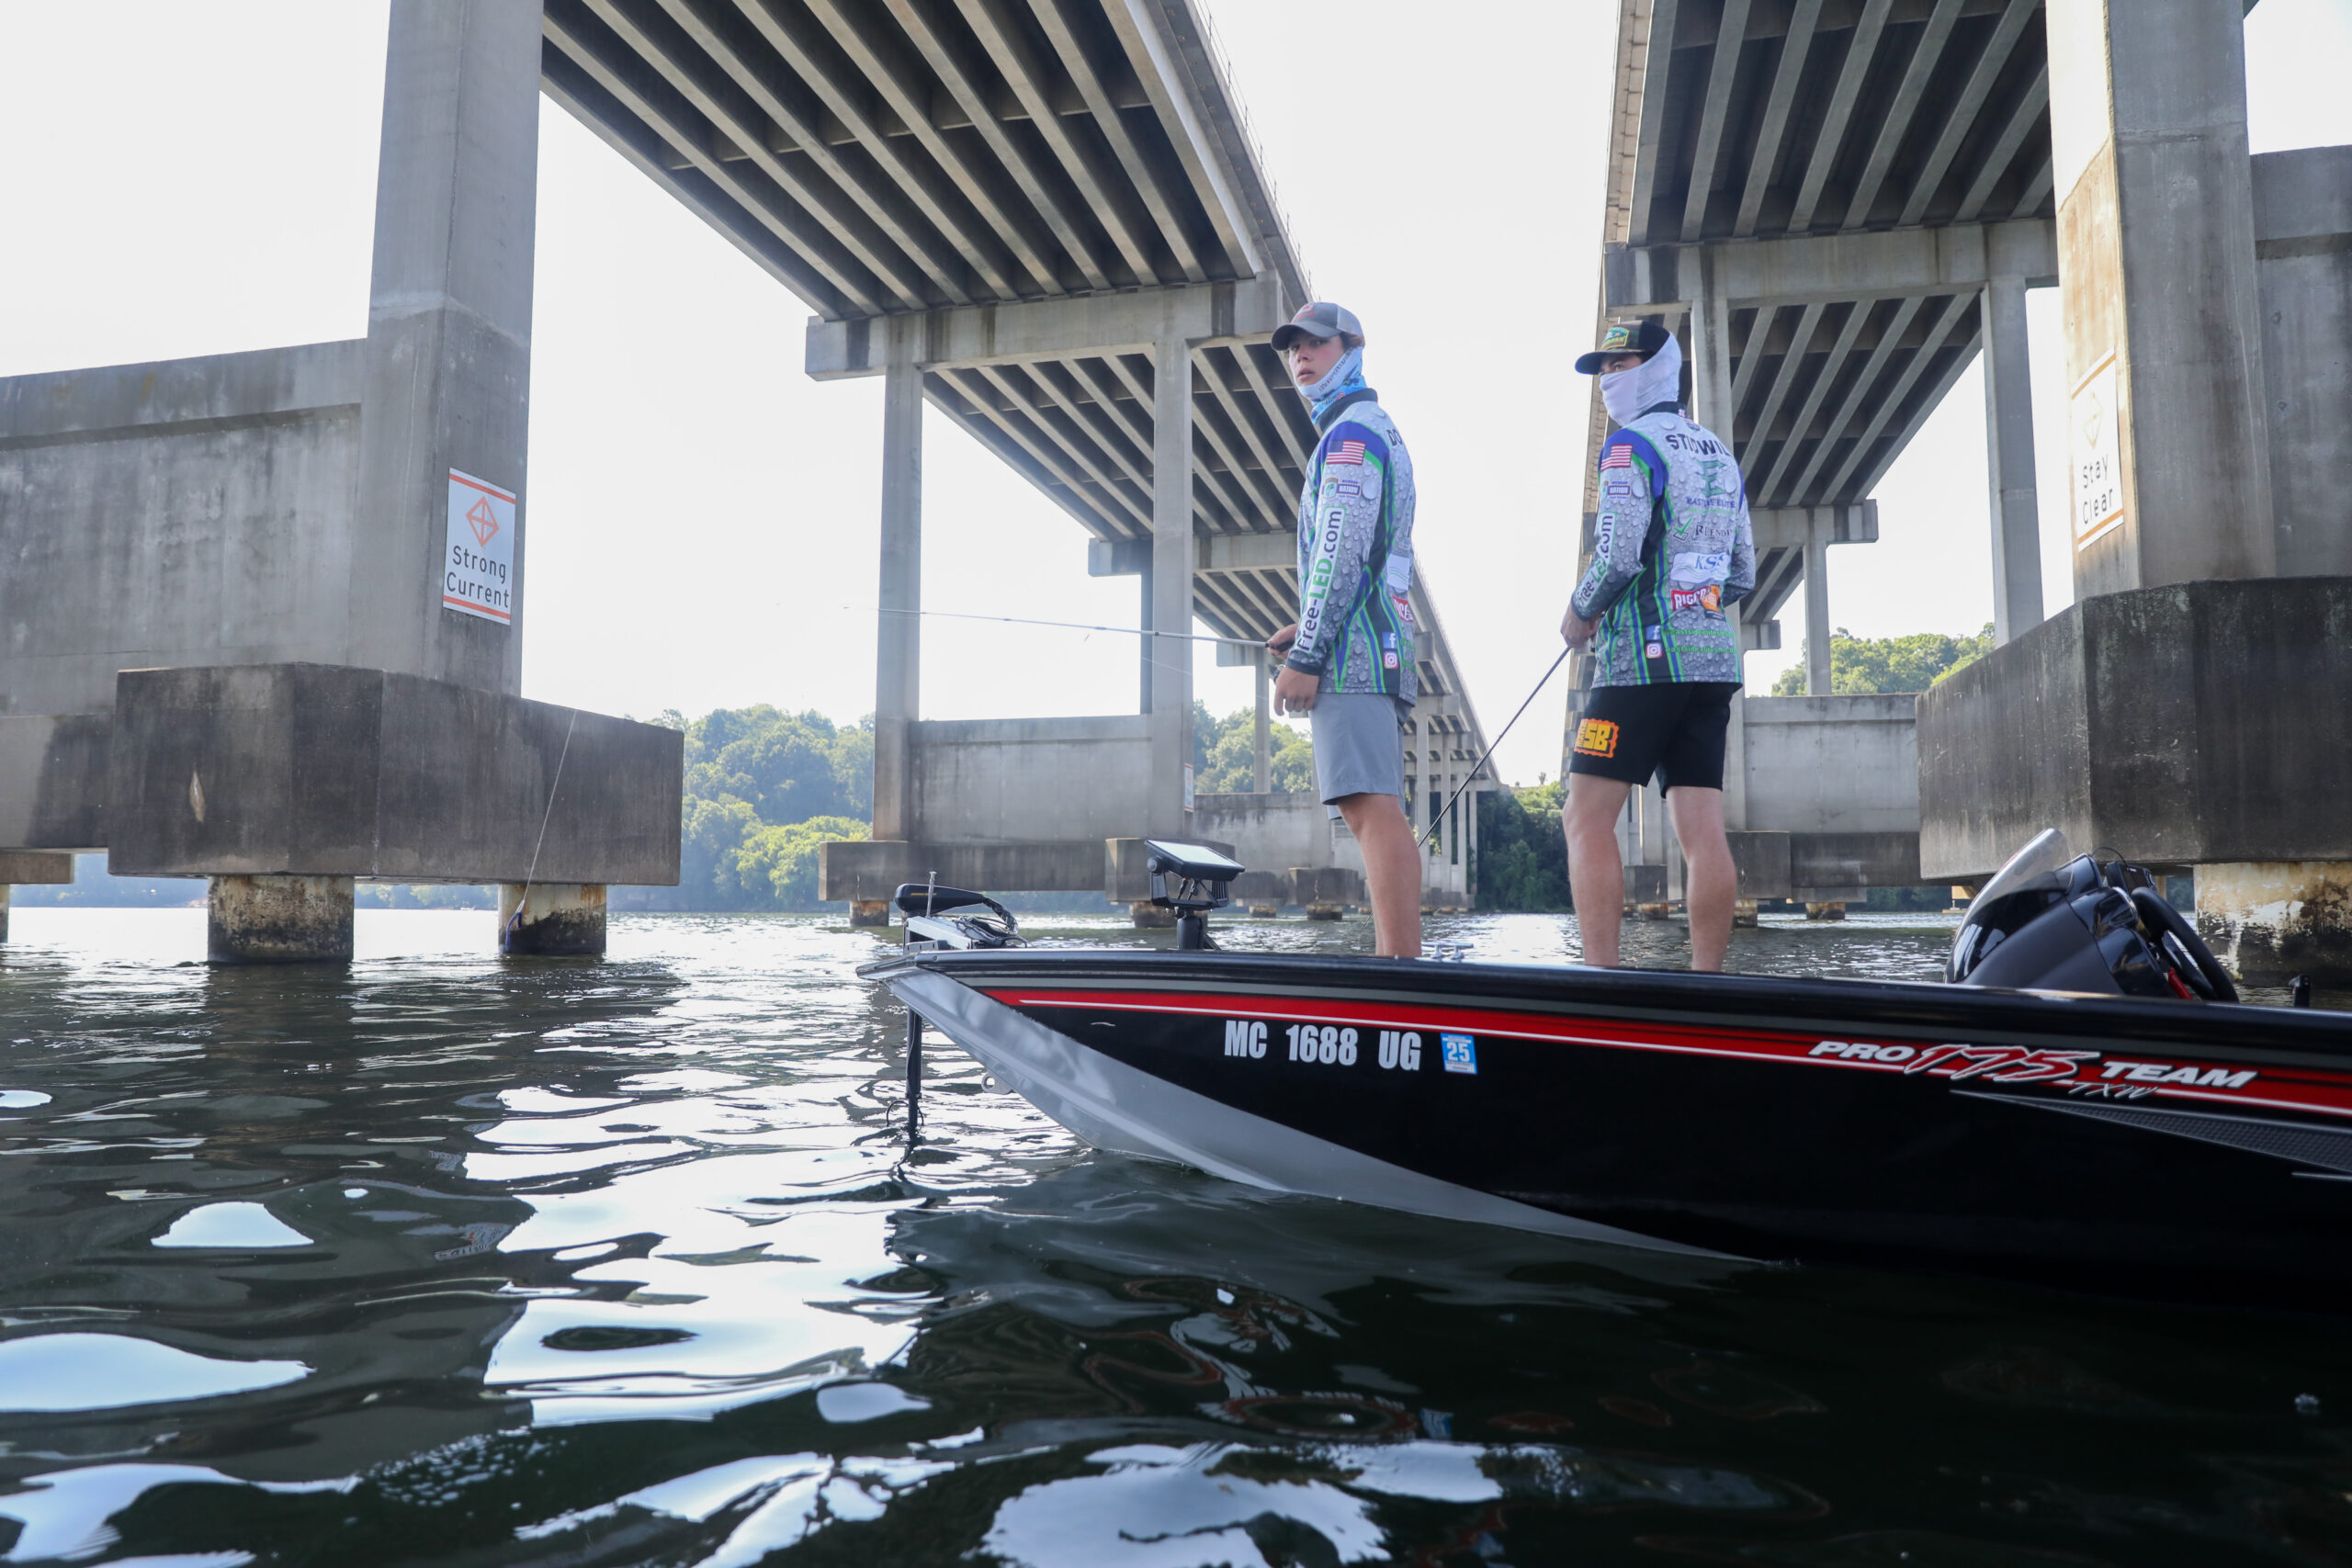 GALLERY: High School National Championship Begins On Pickwick Lake